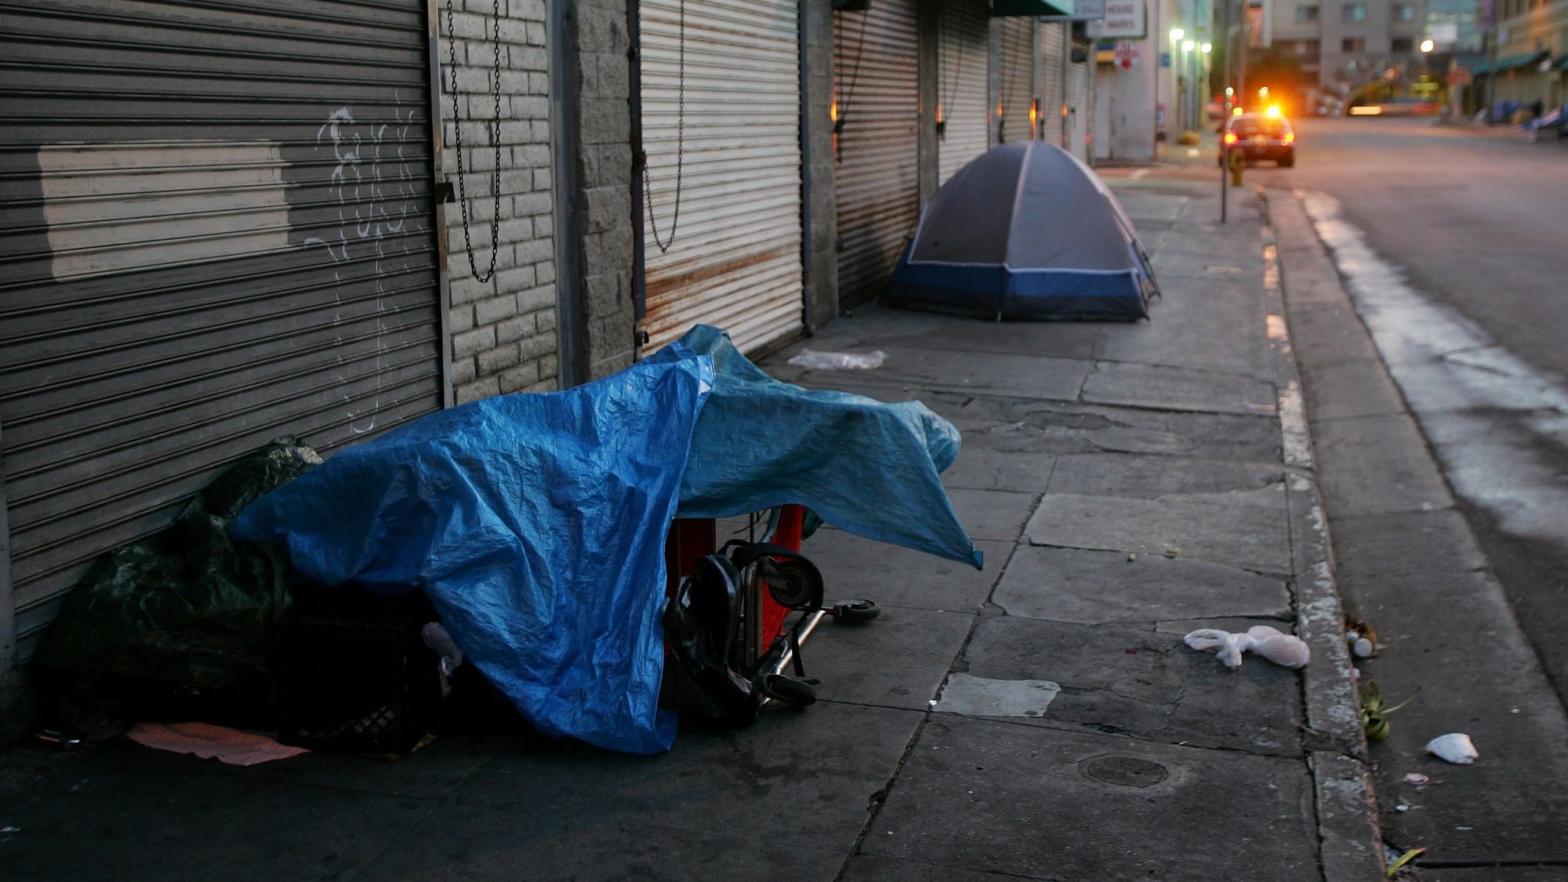 People sleep on the footpath in Los Angeles, California, on April 19, 2006. (Photo: David McNew, Getty Images)